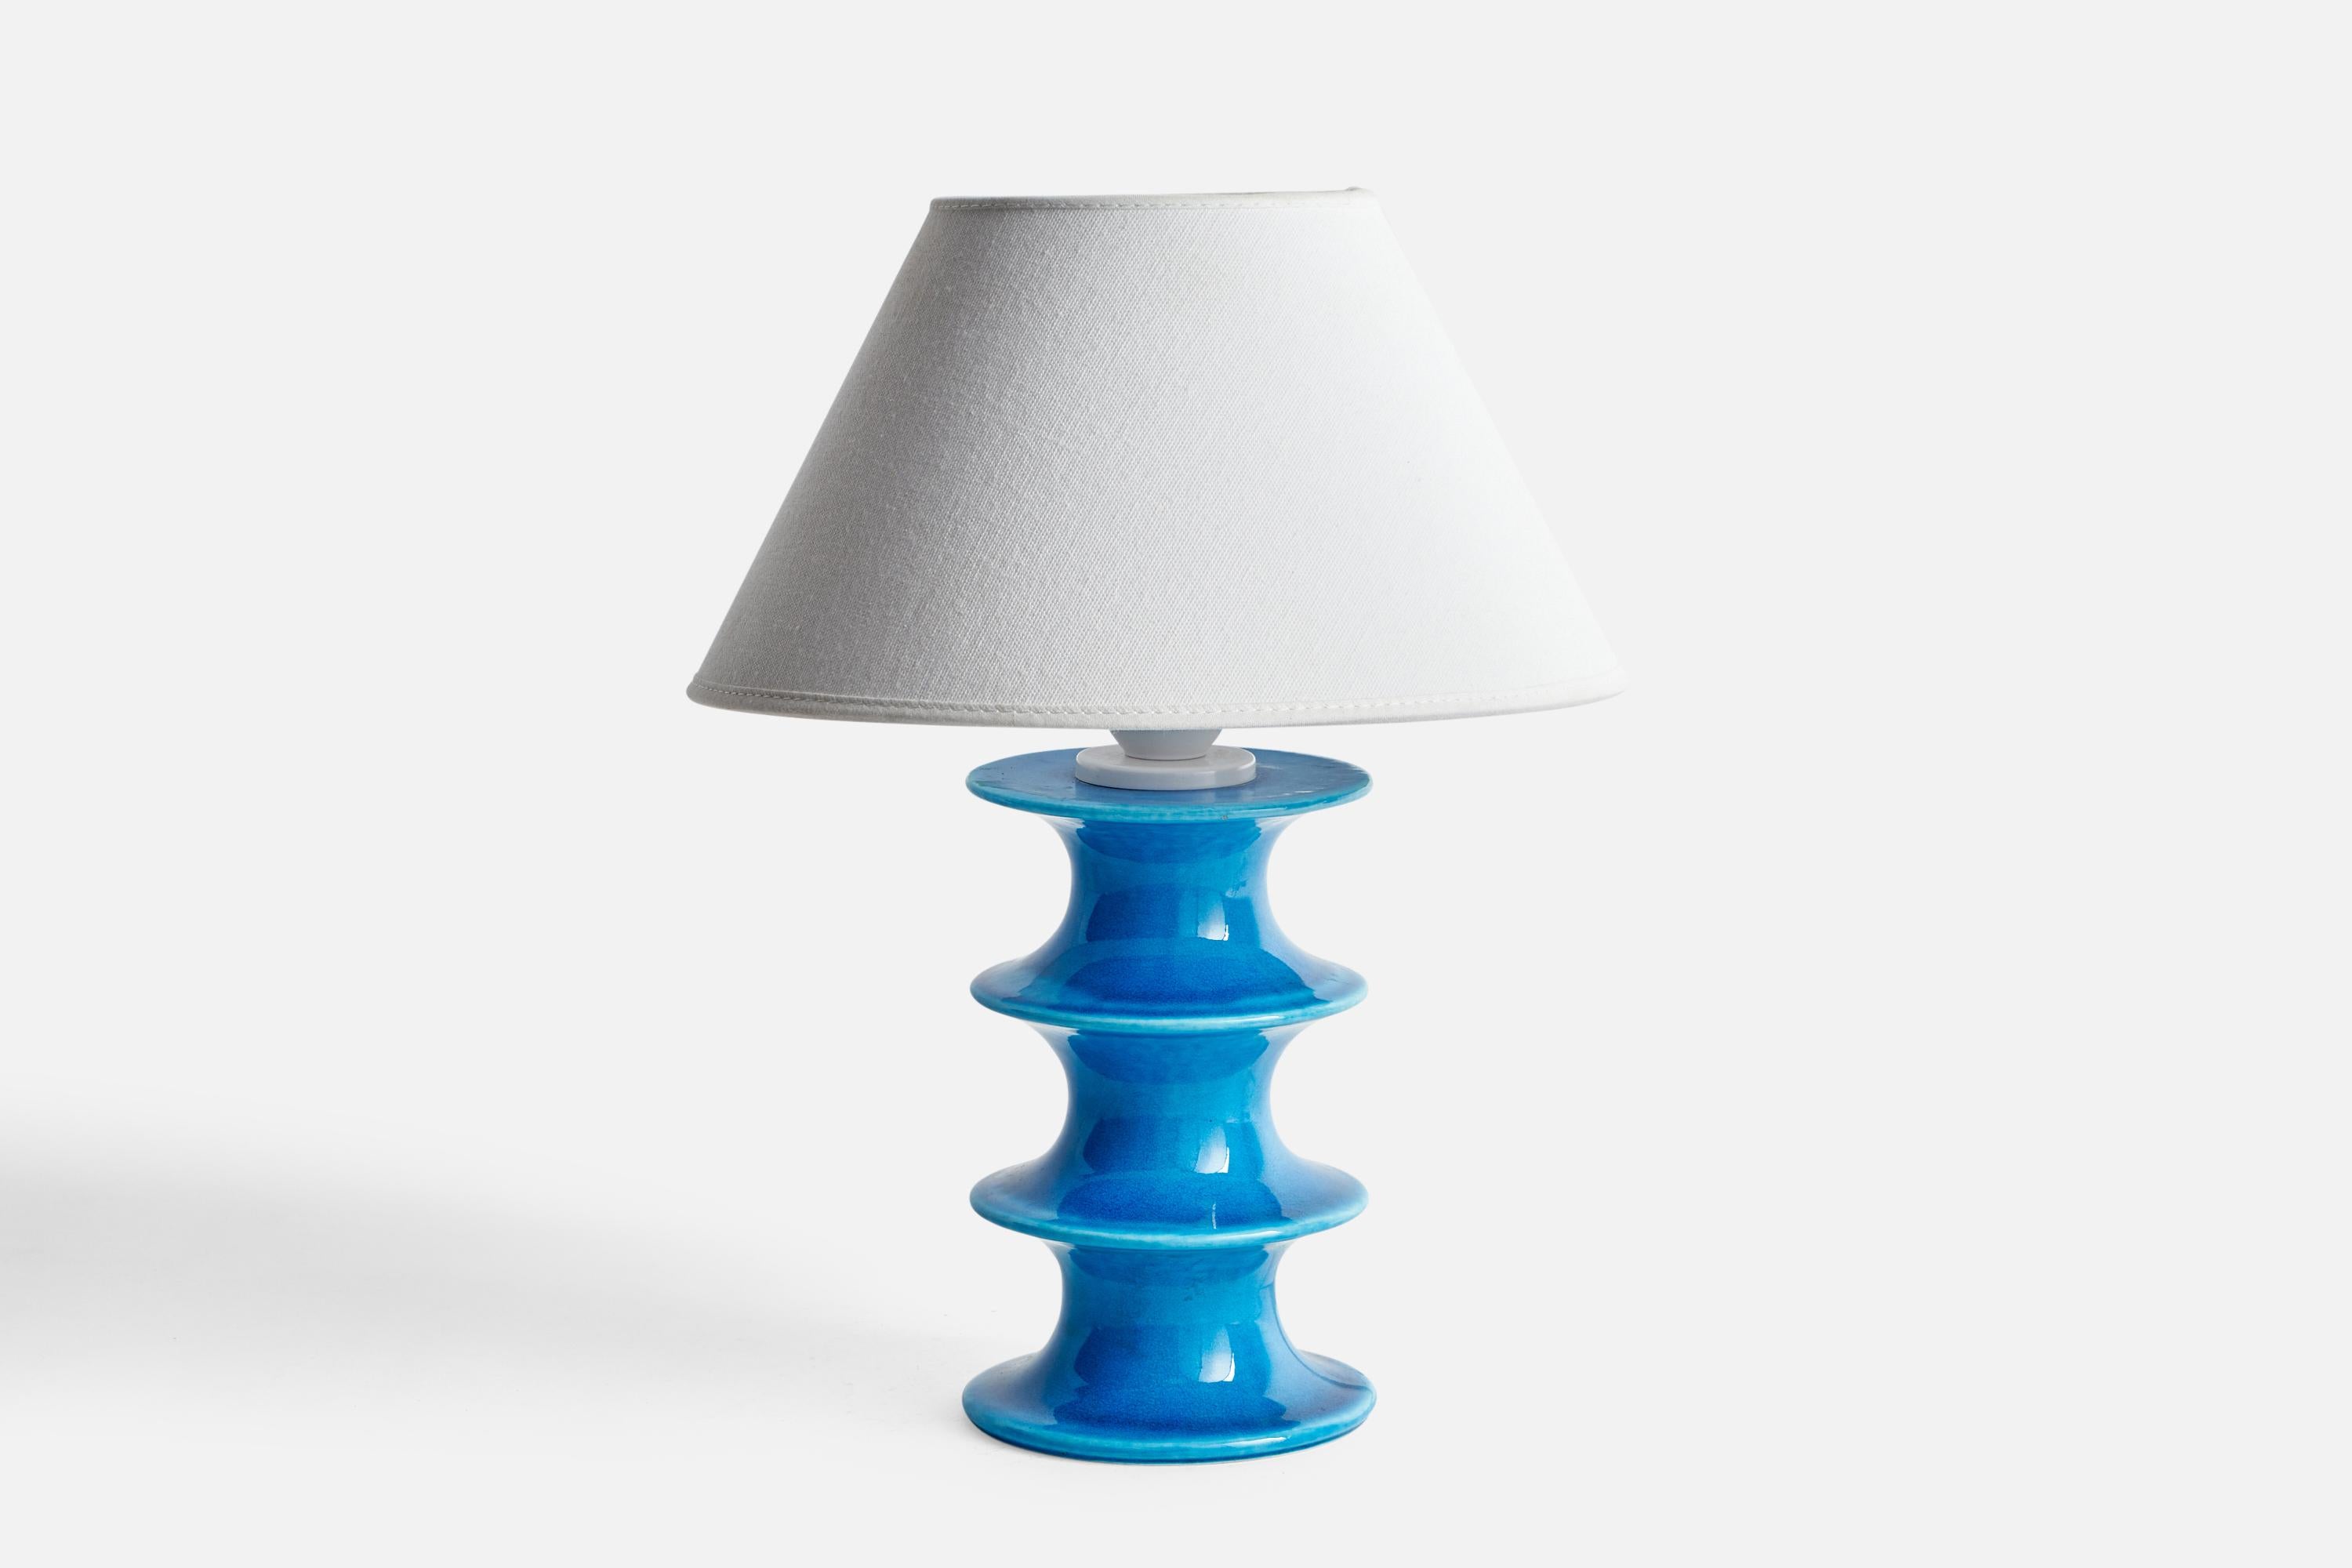 A blue-glazed stoneware table lamp designed by Inger Persson and produced by Rörstrand, Sweden, 1960s.

Dimensions of Lamp (inches): 9.45” H x 4.3” Diameter
Dimensions of Shade (inches): 4.5” Top Diameter x 10” Bottom Diameter x 5.25” H
Dimensions